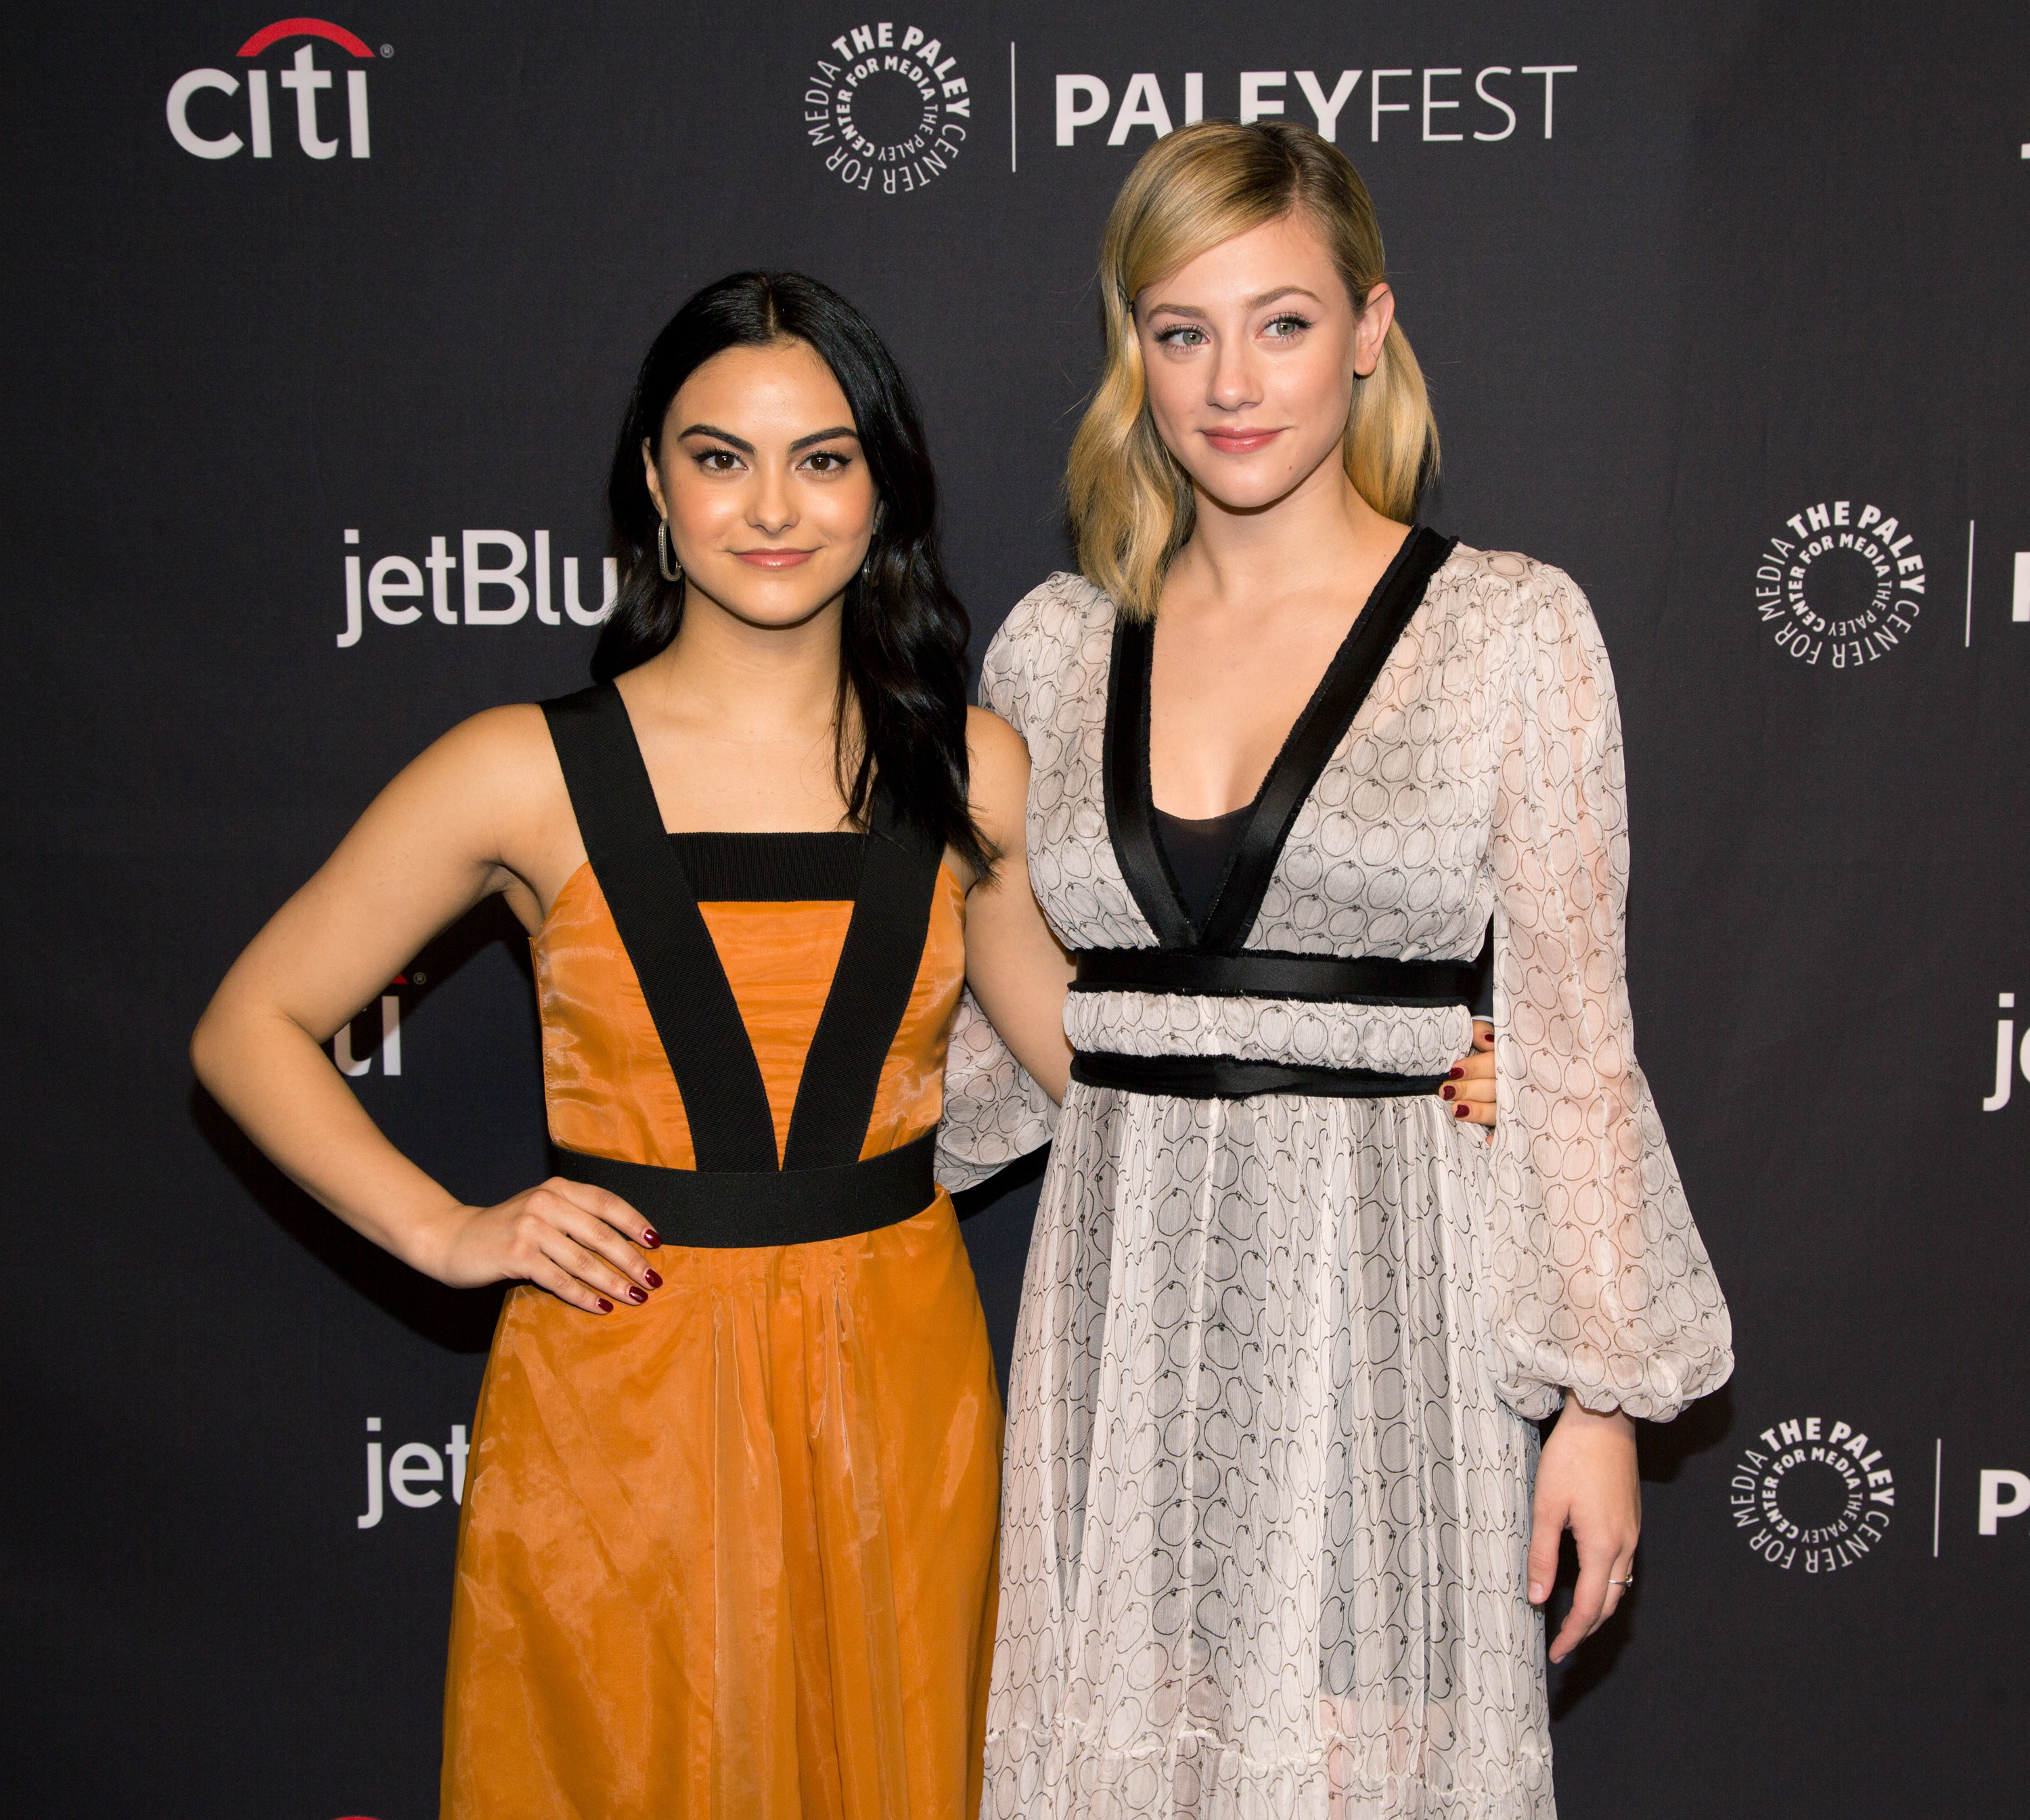 Camila Mendes in an orange sleeveless dress with black straps forming a V shape from shoulder to waist. Her dark hair is down and she smiles with her arm around Lili Reinhart, who wears her hair down and a white chiffon-like dress with balloon sleeves.